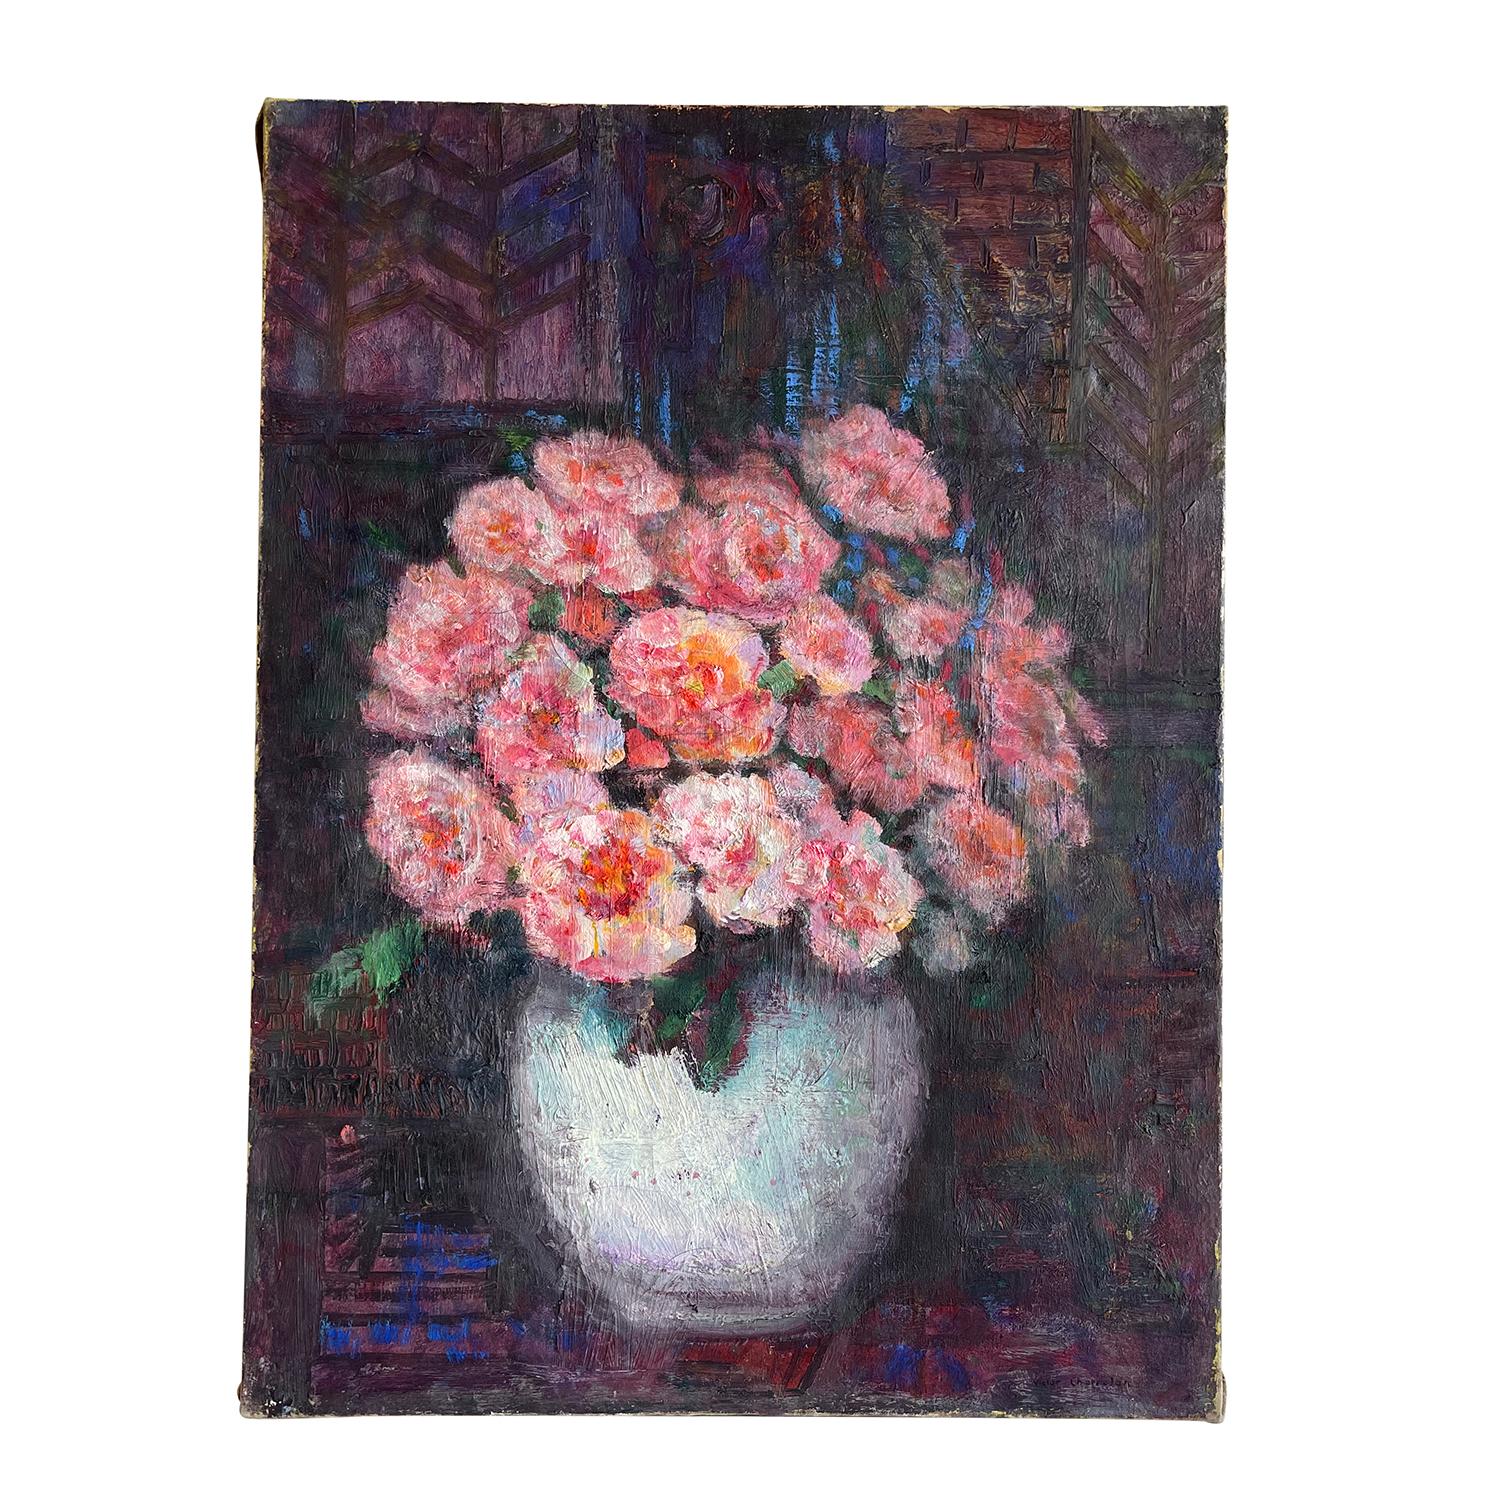 Hand-Painted 20th Century French Oil Painting of a Vase with Pink Flowers by Victor Charreton For Sale